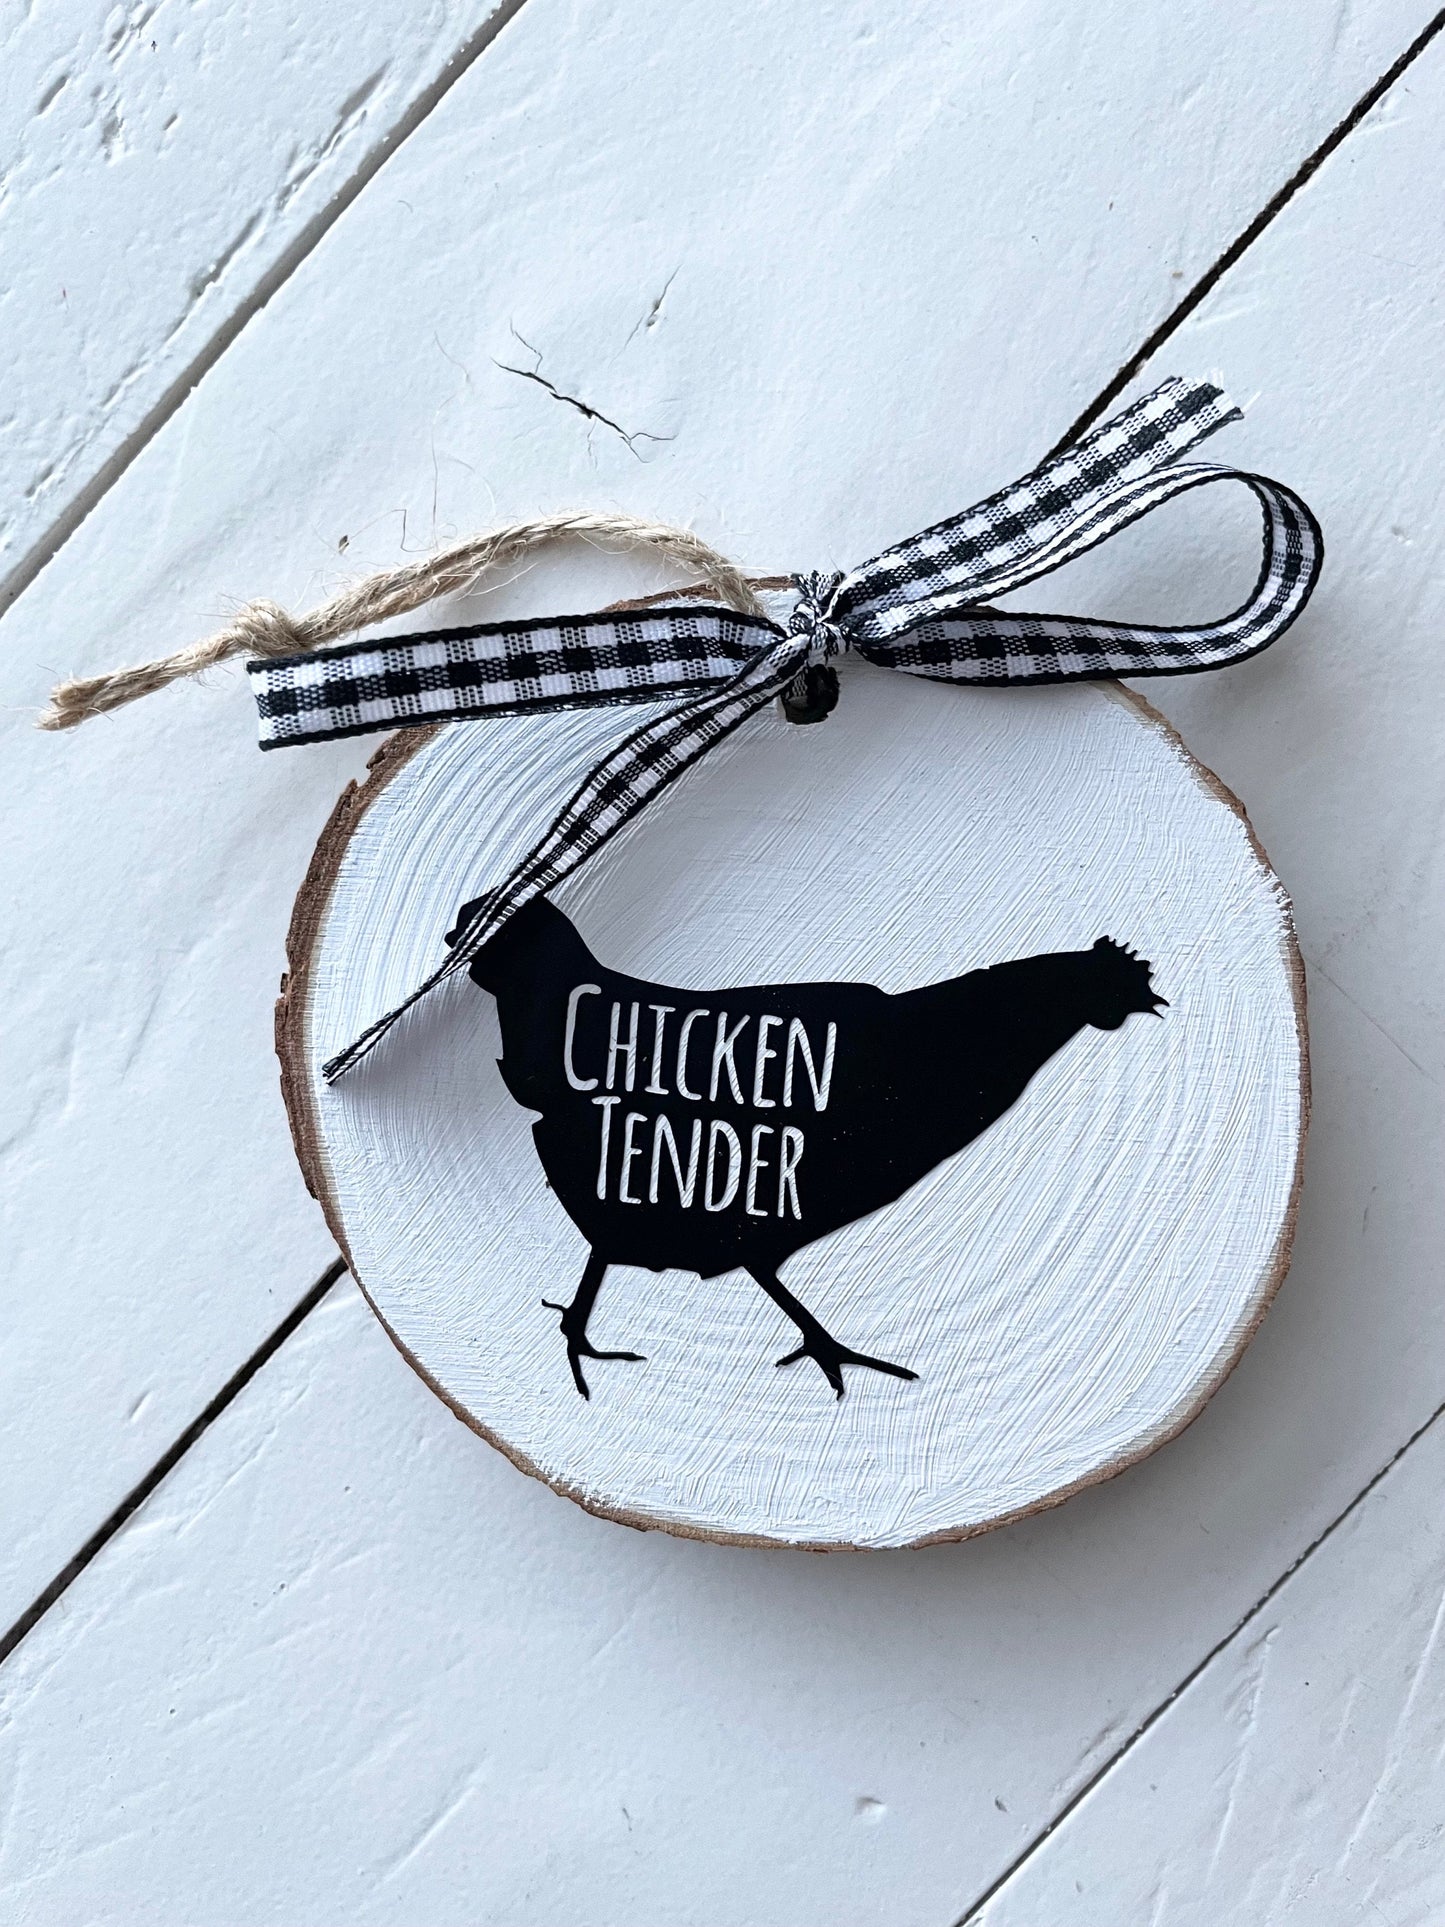 People who take care of chickens are literally Called chicken tenders, Tea Towel & Or Ornament